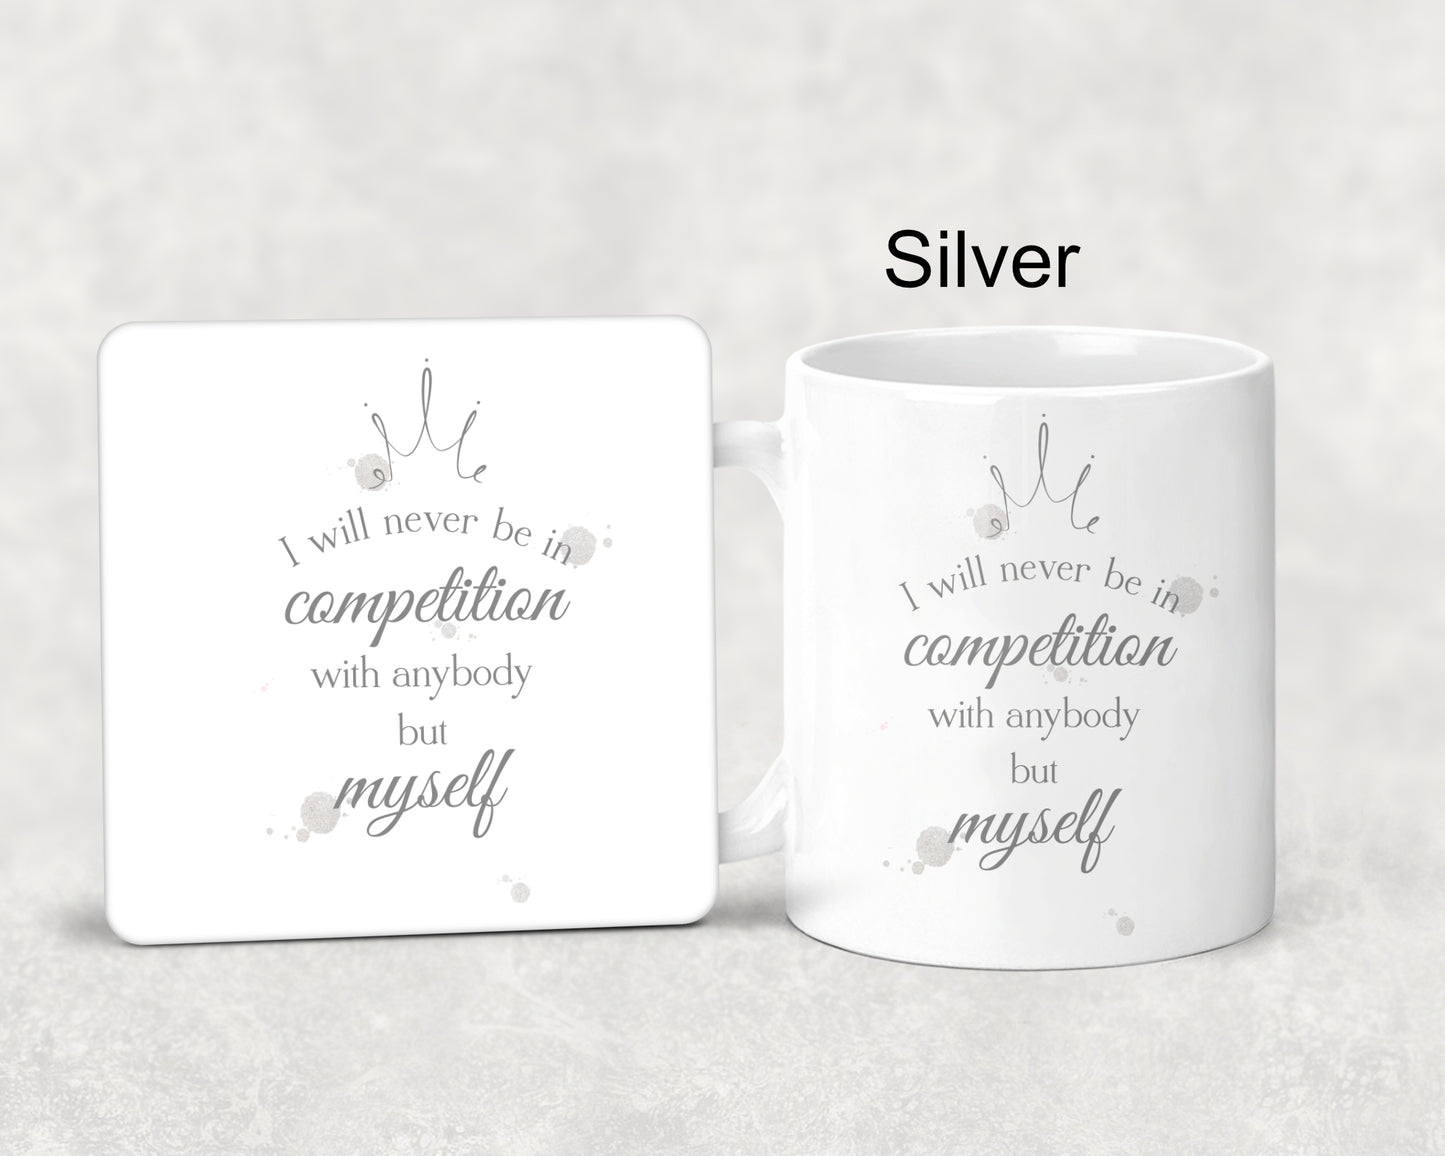 Mug and coaster set featuring a crown and a watercolour splodge design in silver with the text 'I will never be in competition with anybody but myself' 